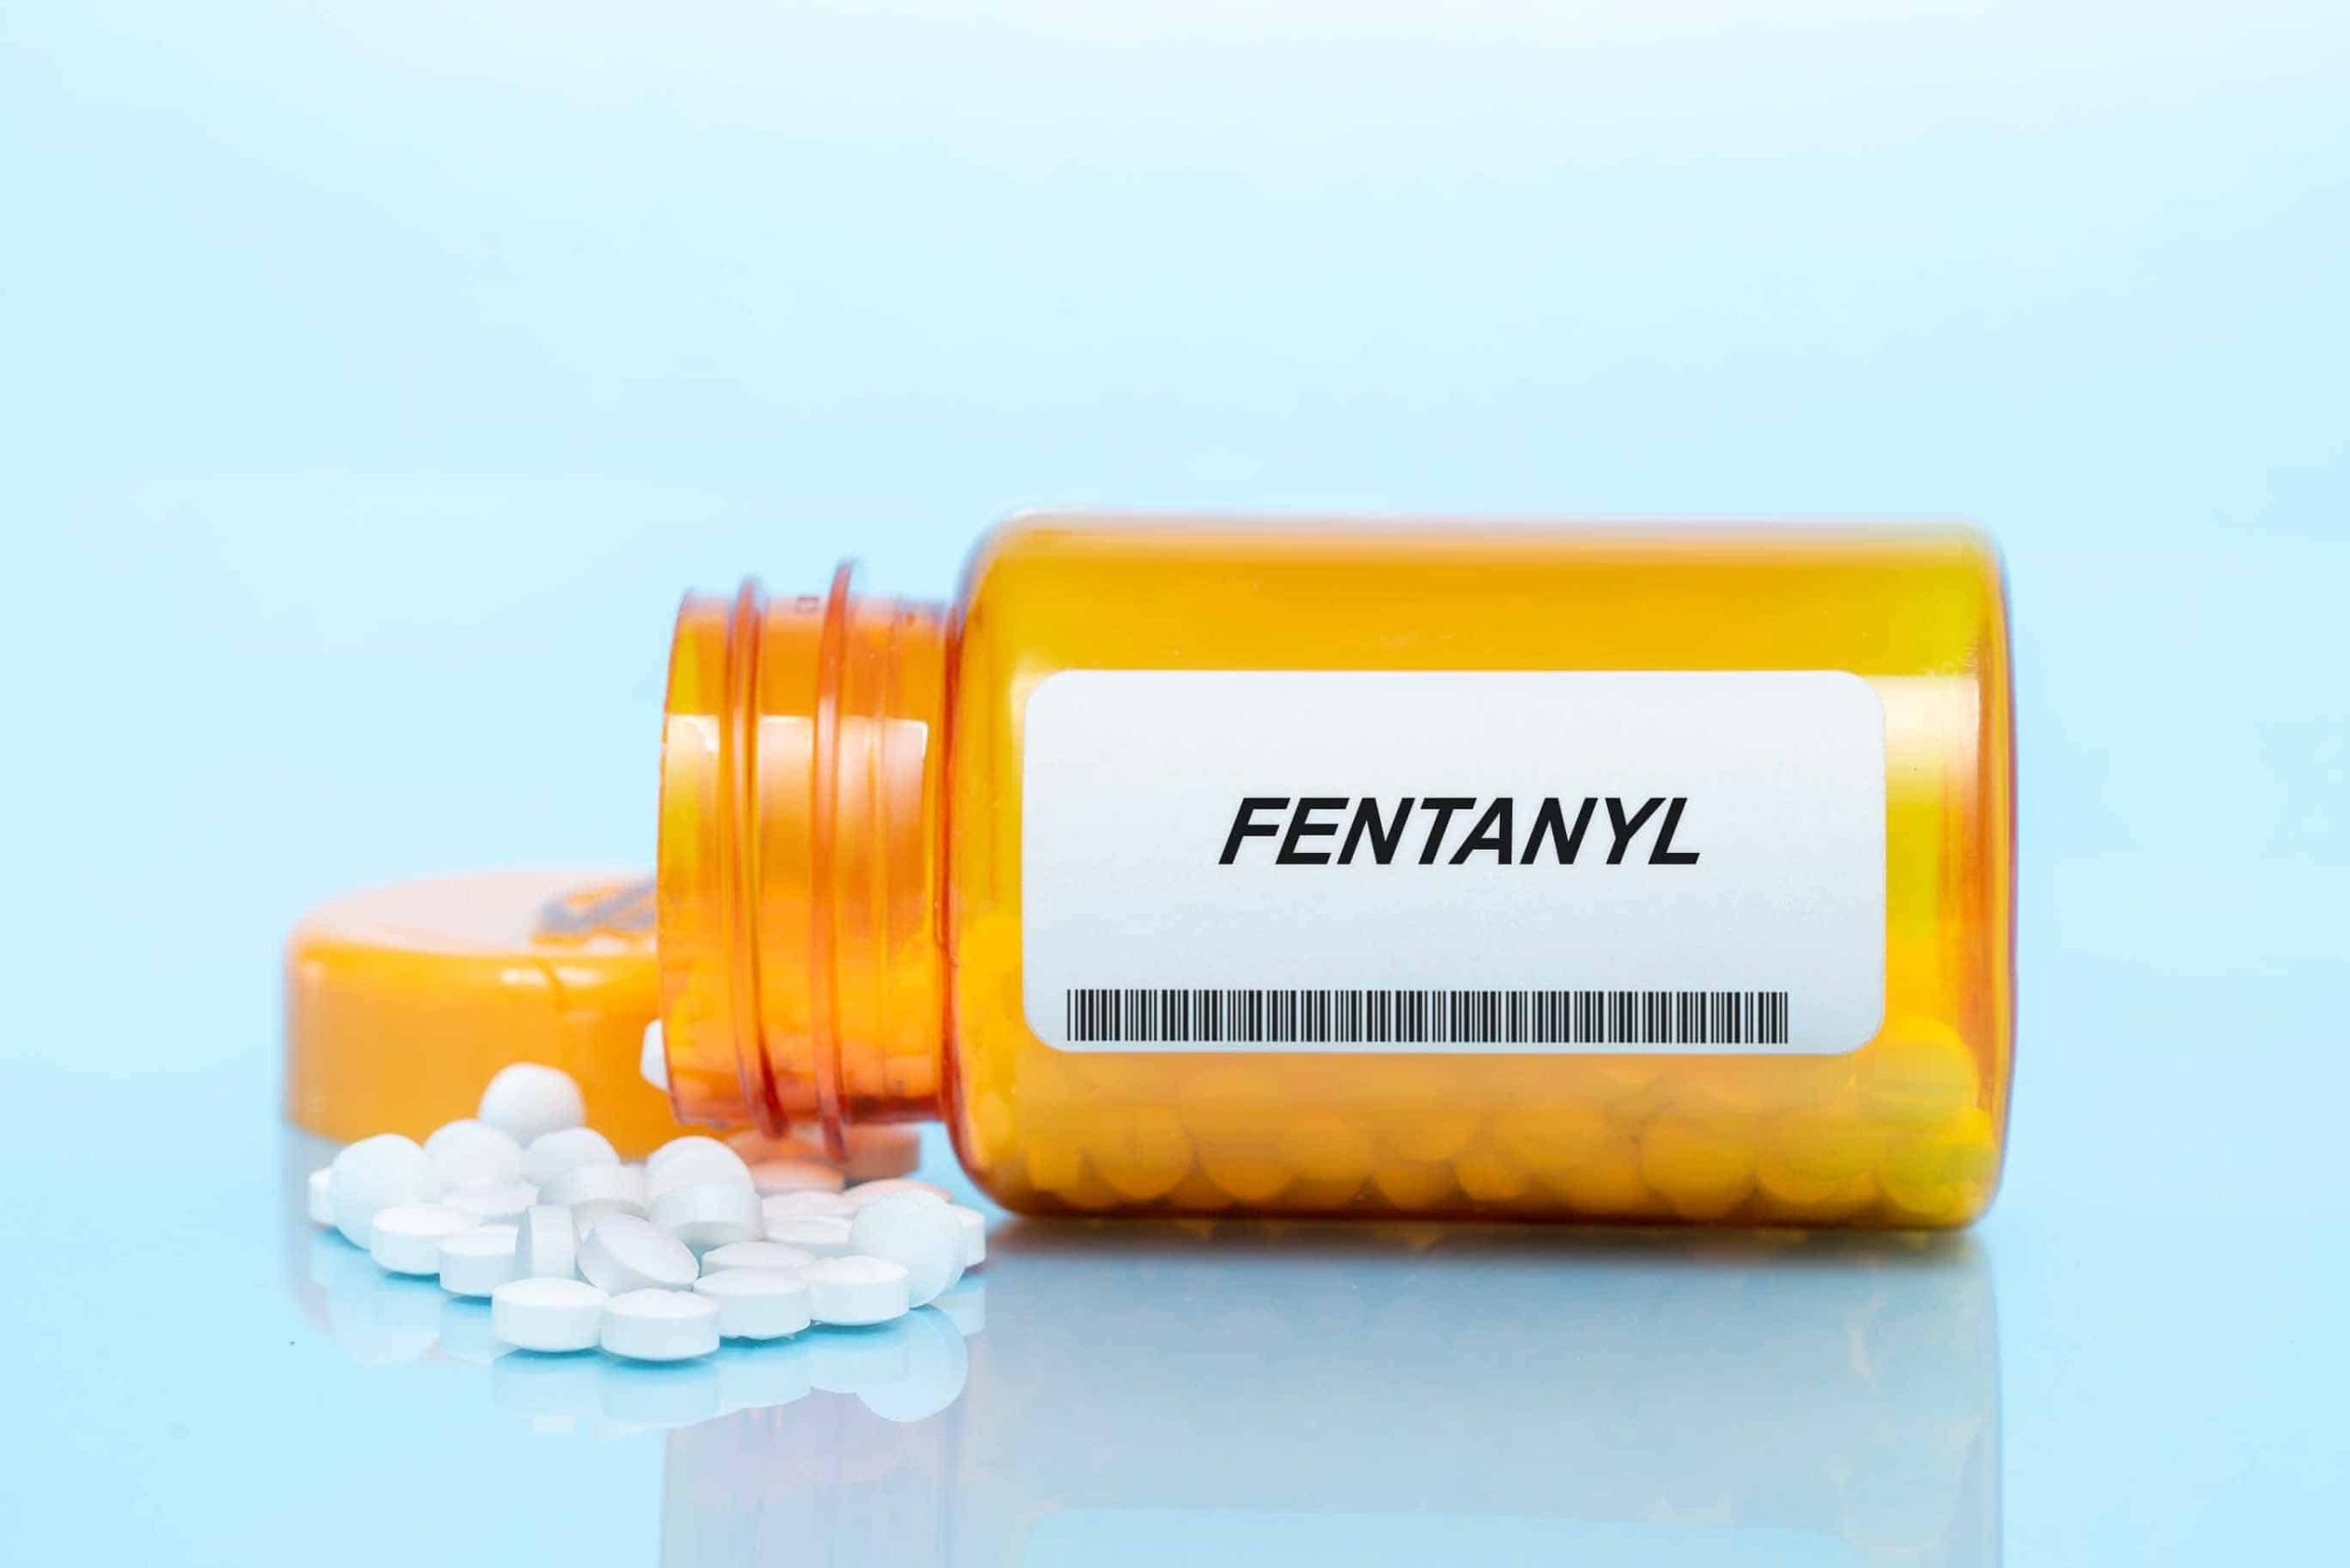 DEA Scoops Up 36 Million Lethal Doses of Fentanyl Off the Streets